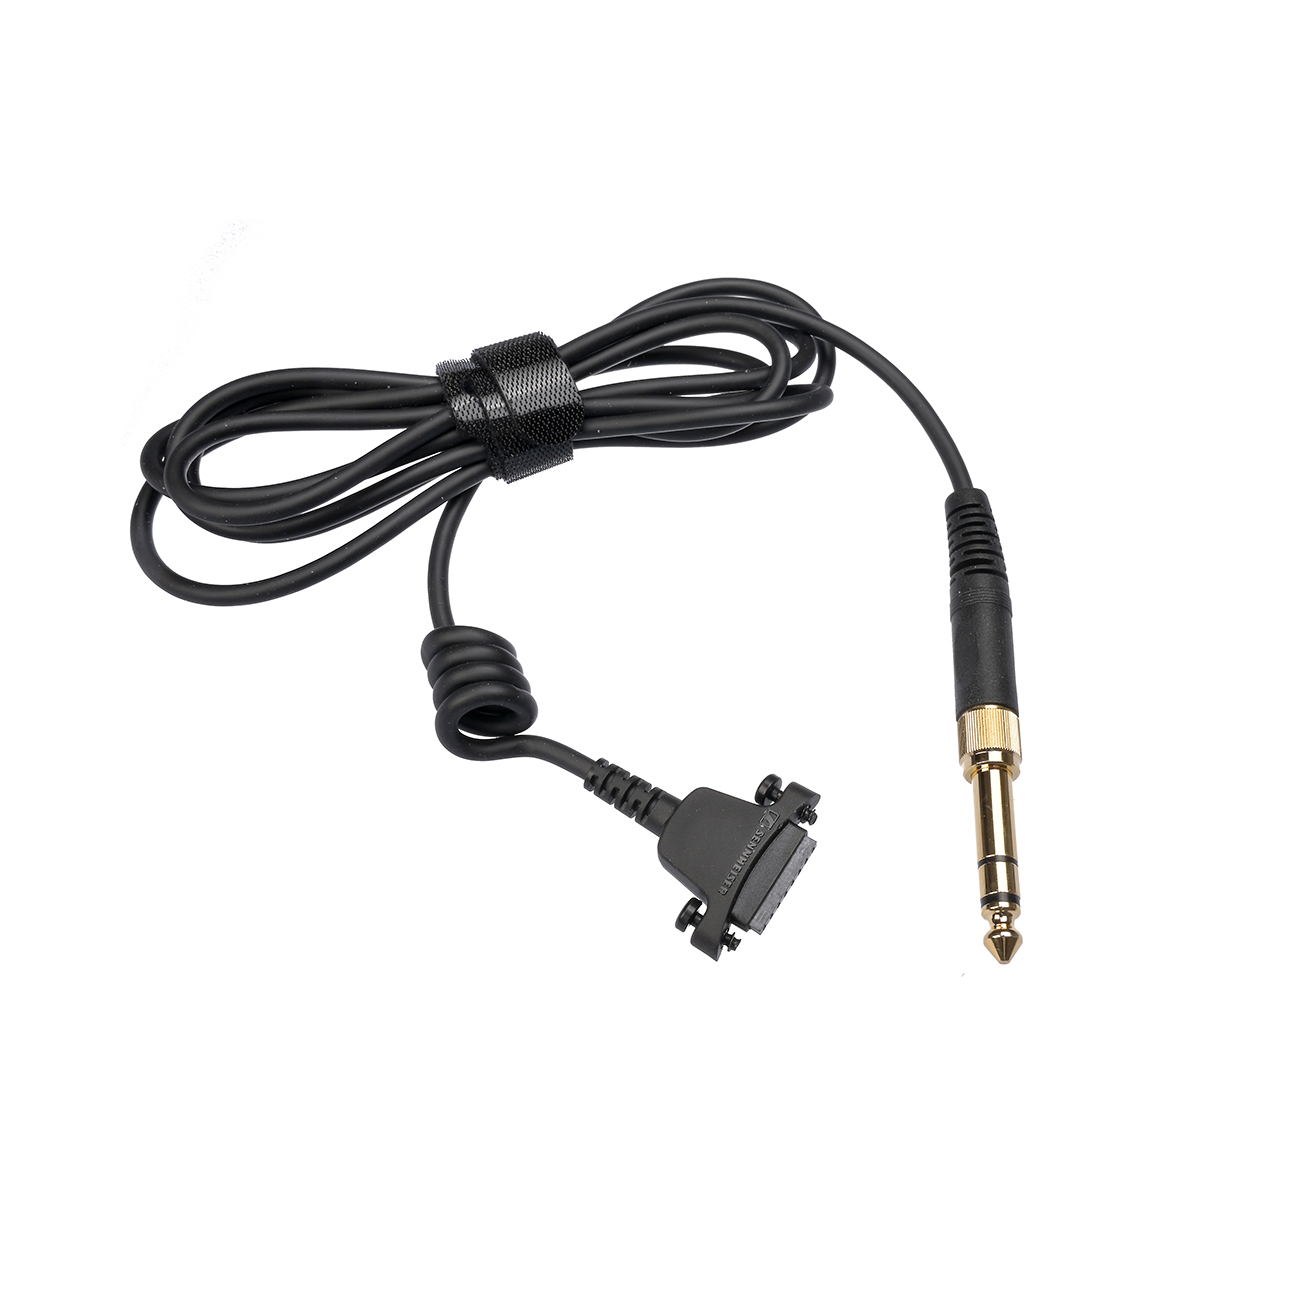 Cable with stereo plug